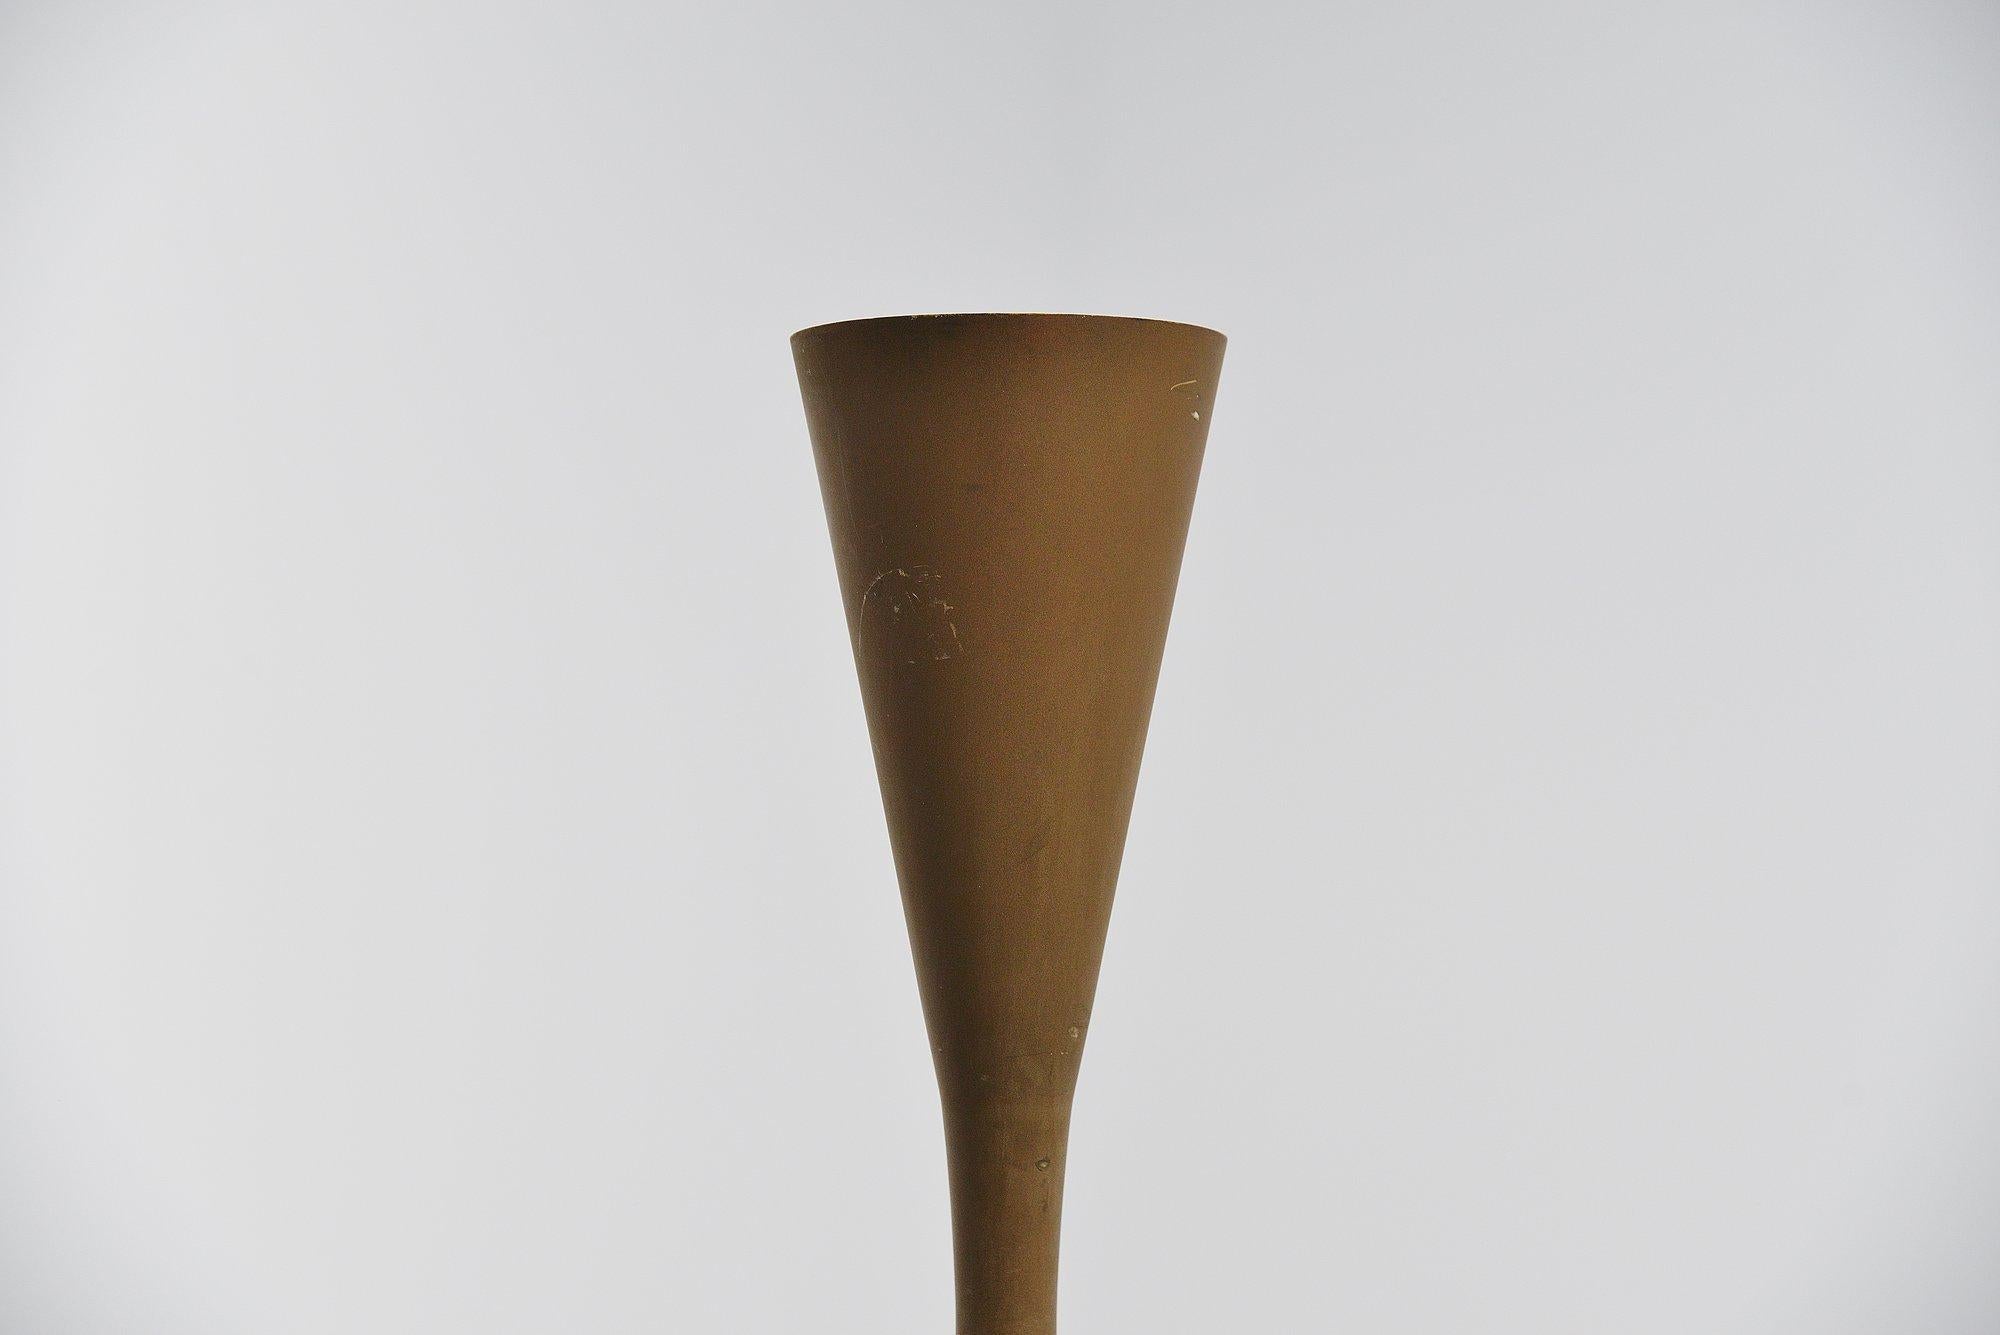 Very nice and rare early Luminator floor lamp designed by Pietro Chiese and manufactured by Fontana Arte, Italy, 1935. This example is probably from 1950. The lamp is in brass patinated metal and has a very nice patina from age and usage. This